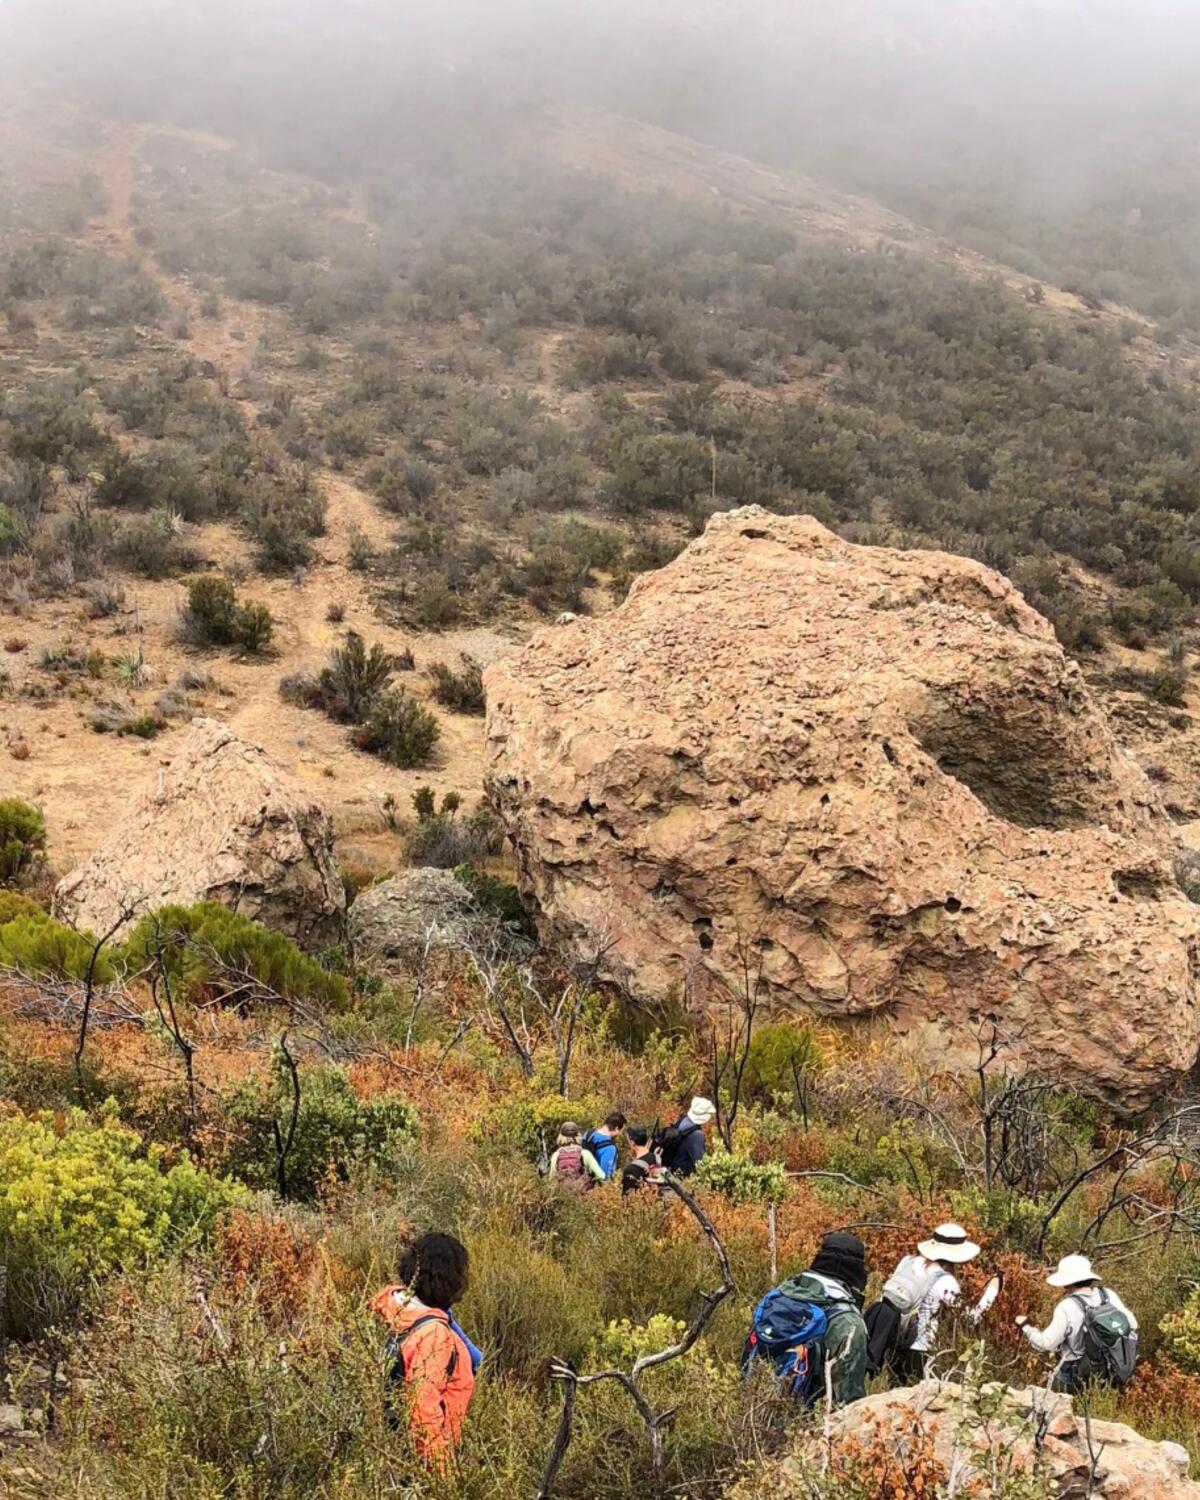 A group of people on a steep hiking trail.